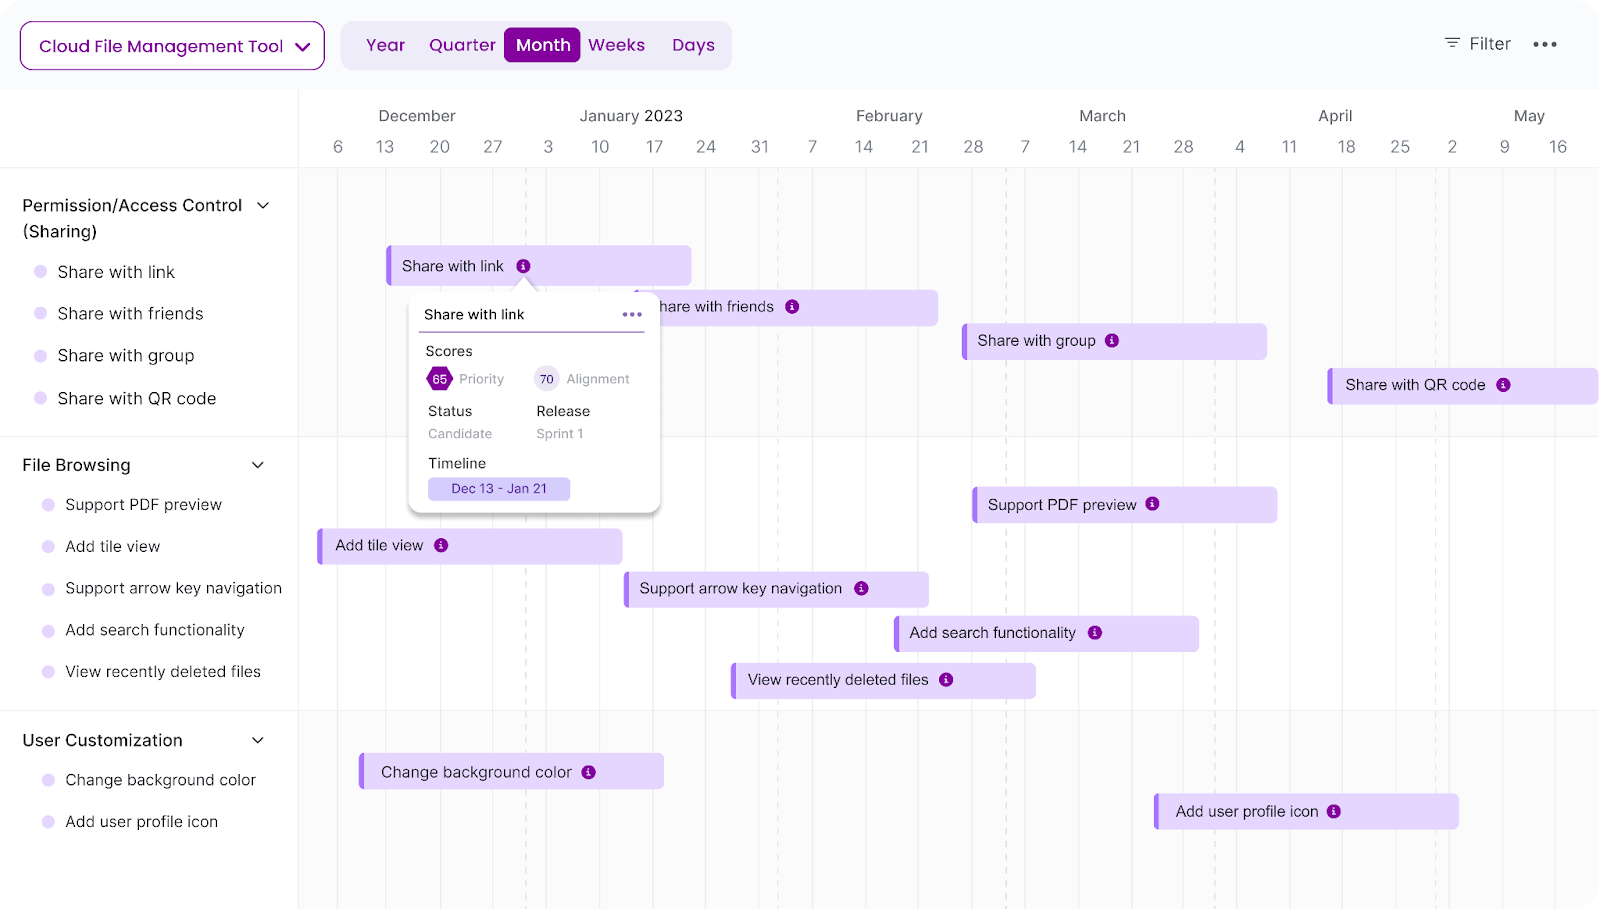 Chisel's Timeline View shows a calendar that illustrates how specific features allocate time, providing valuable high-level insights.